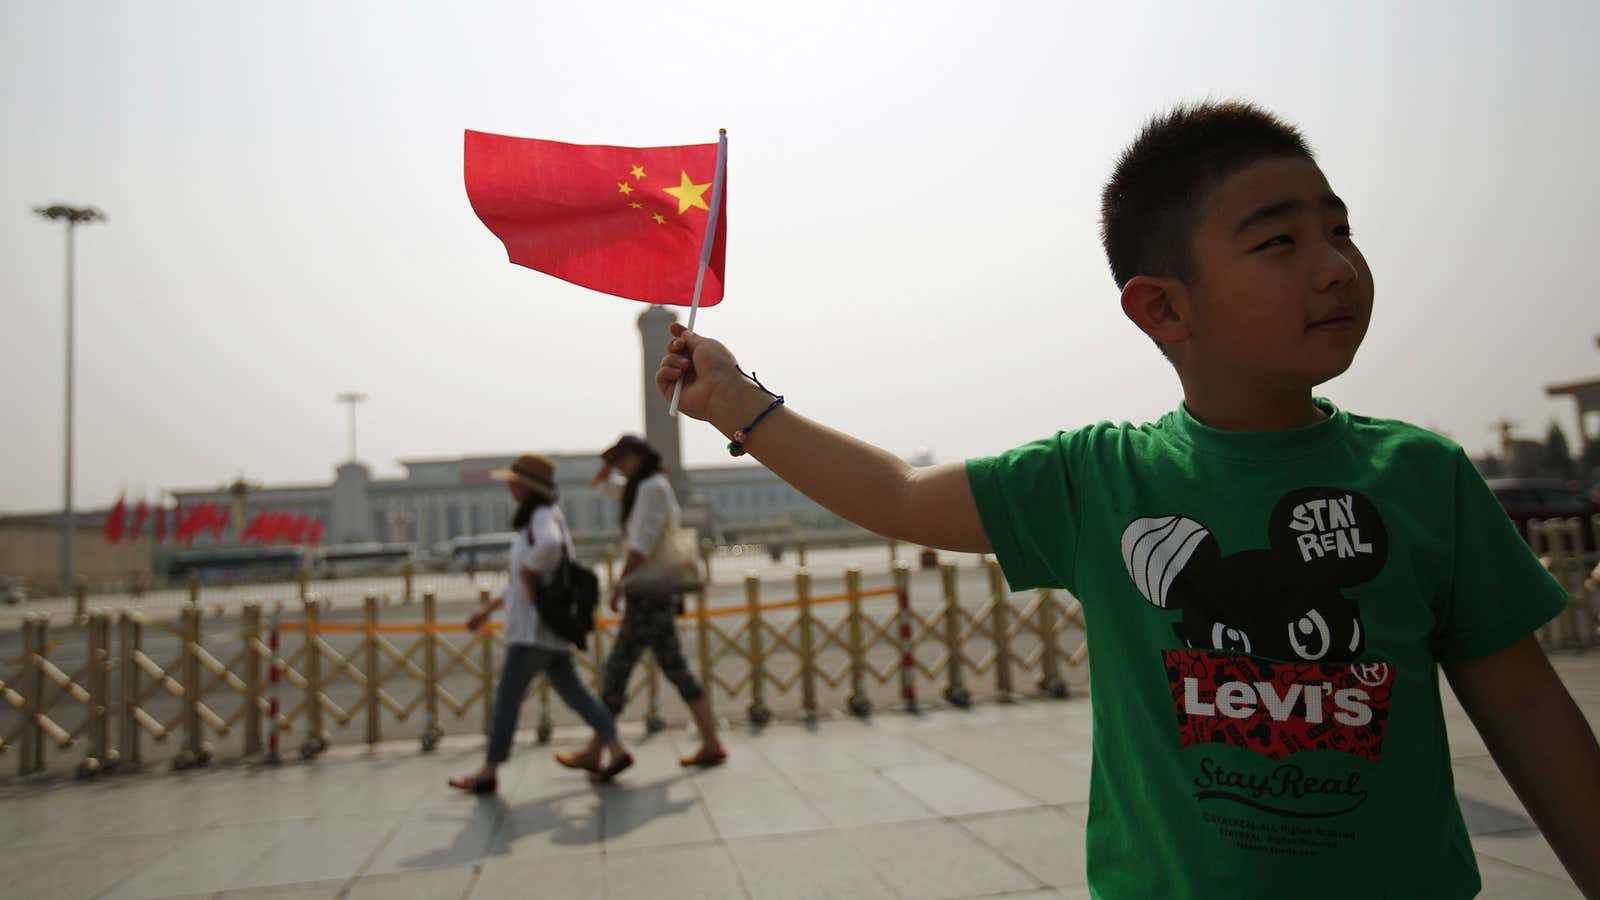 “An Internet power—Telling the world that the Chinese Dream is lifting up China.”